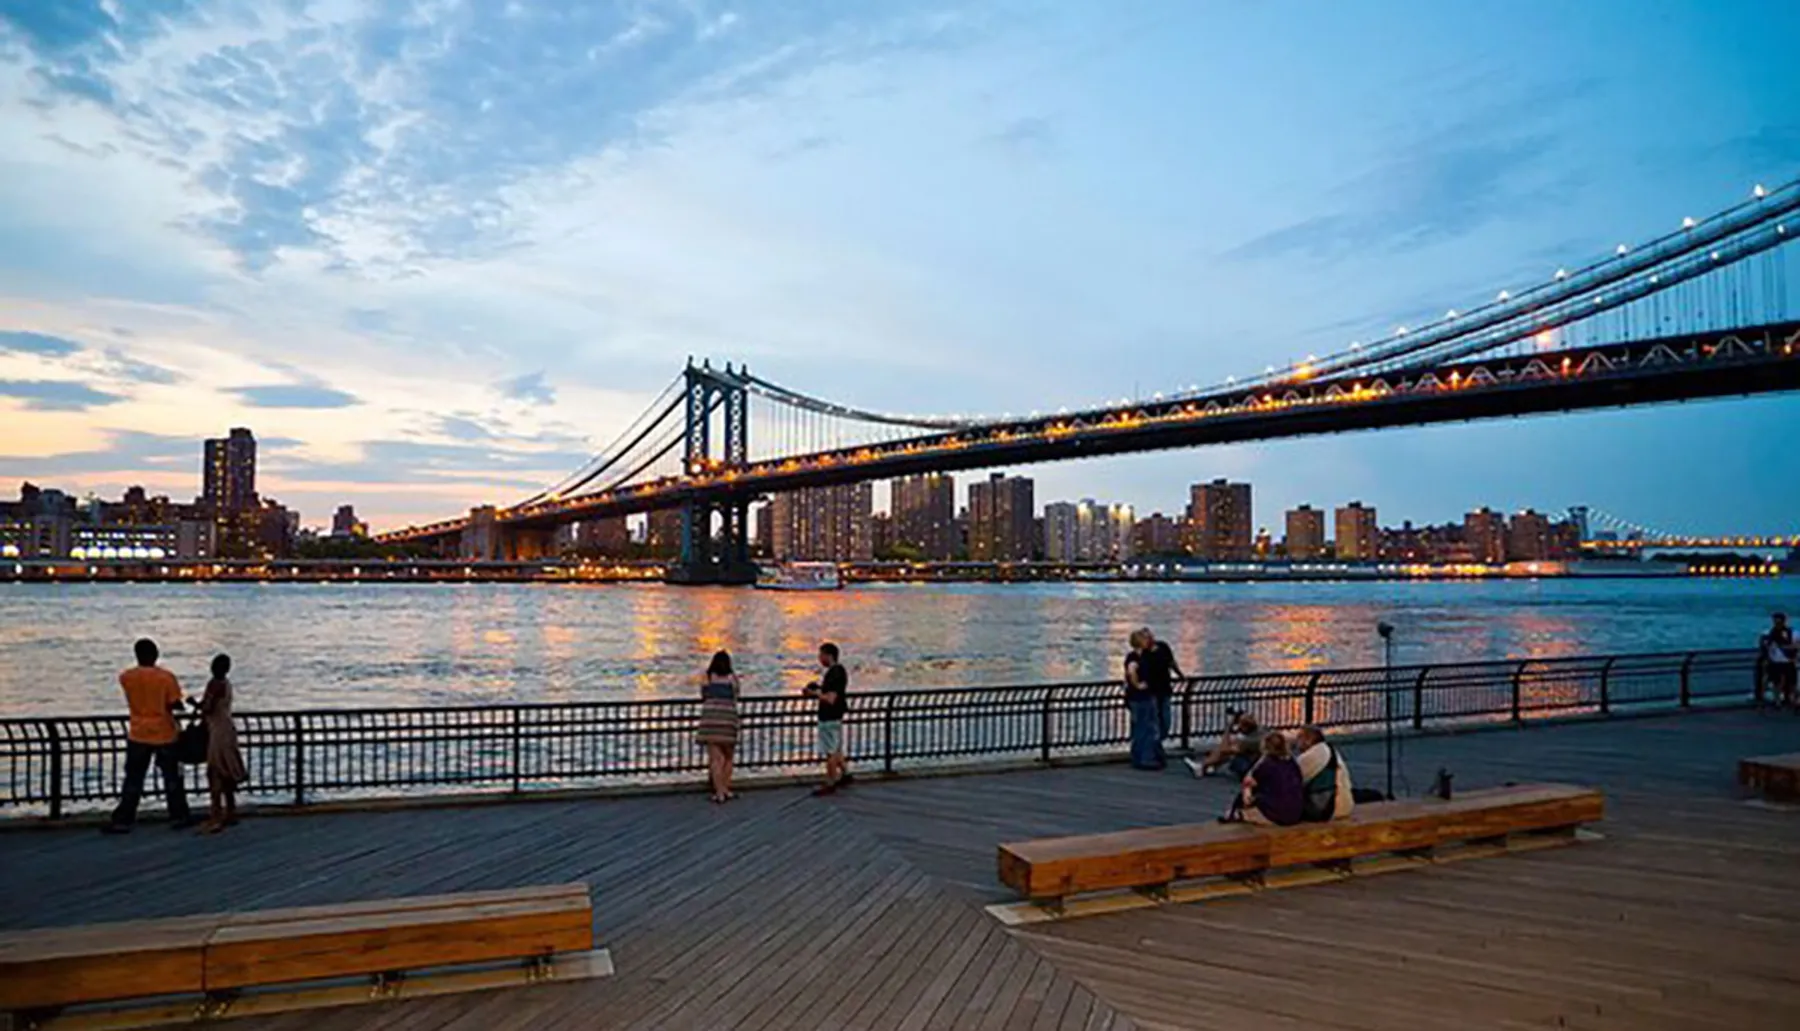 People enjoy the evening view of a lit-up suspension bridge from a waterfront boardwalk.